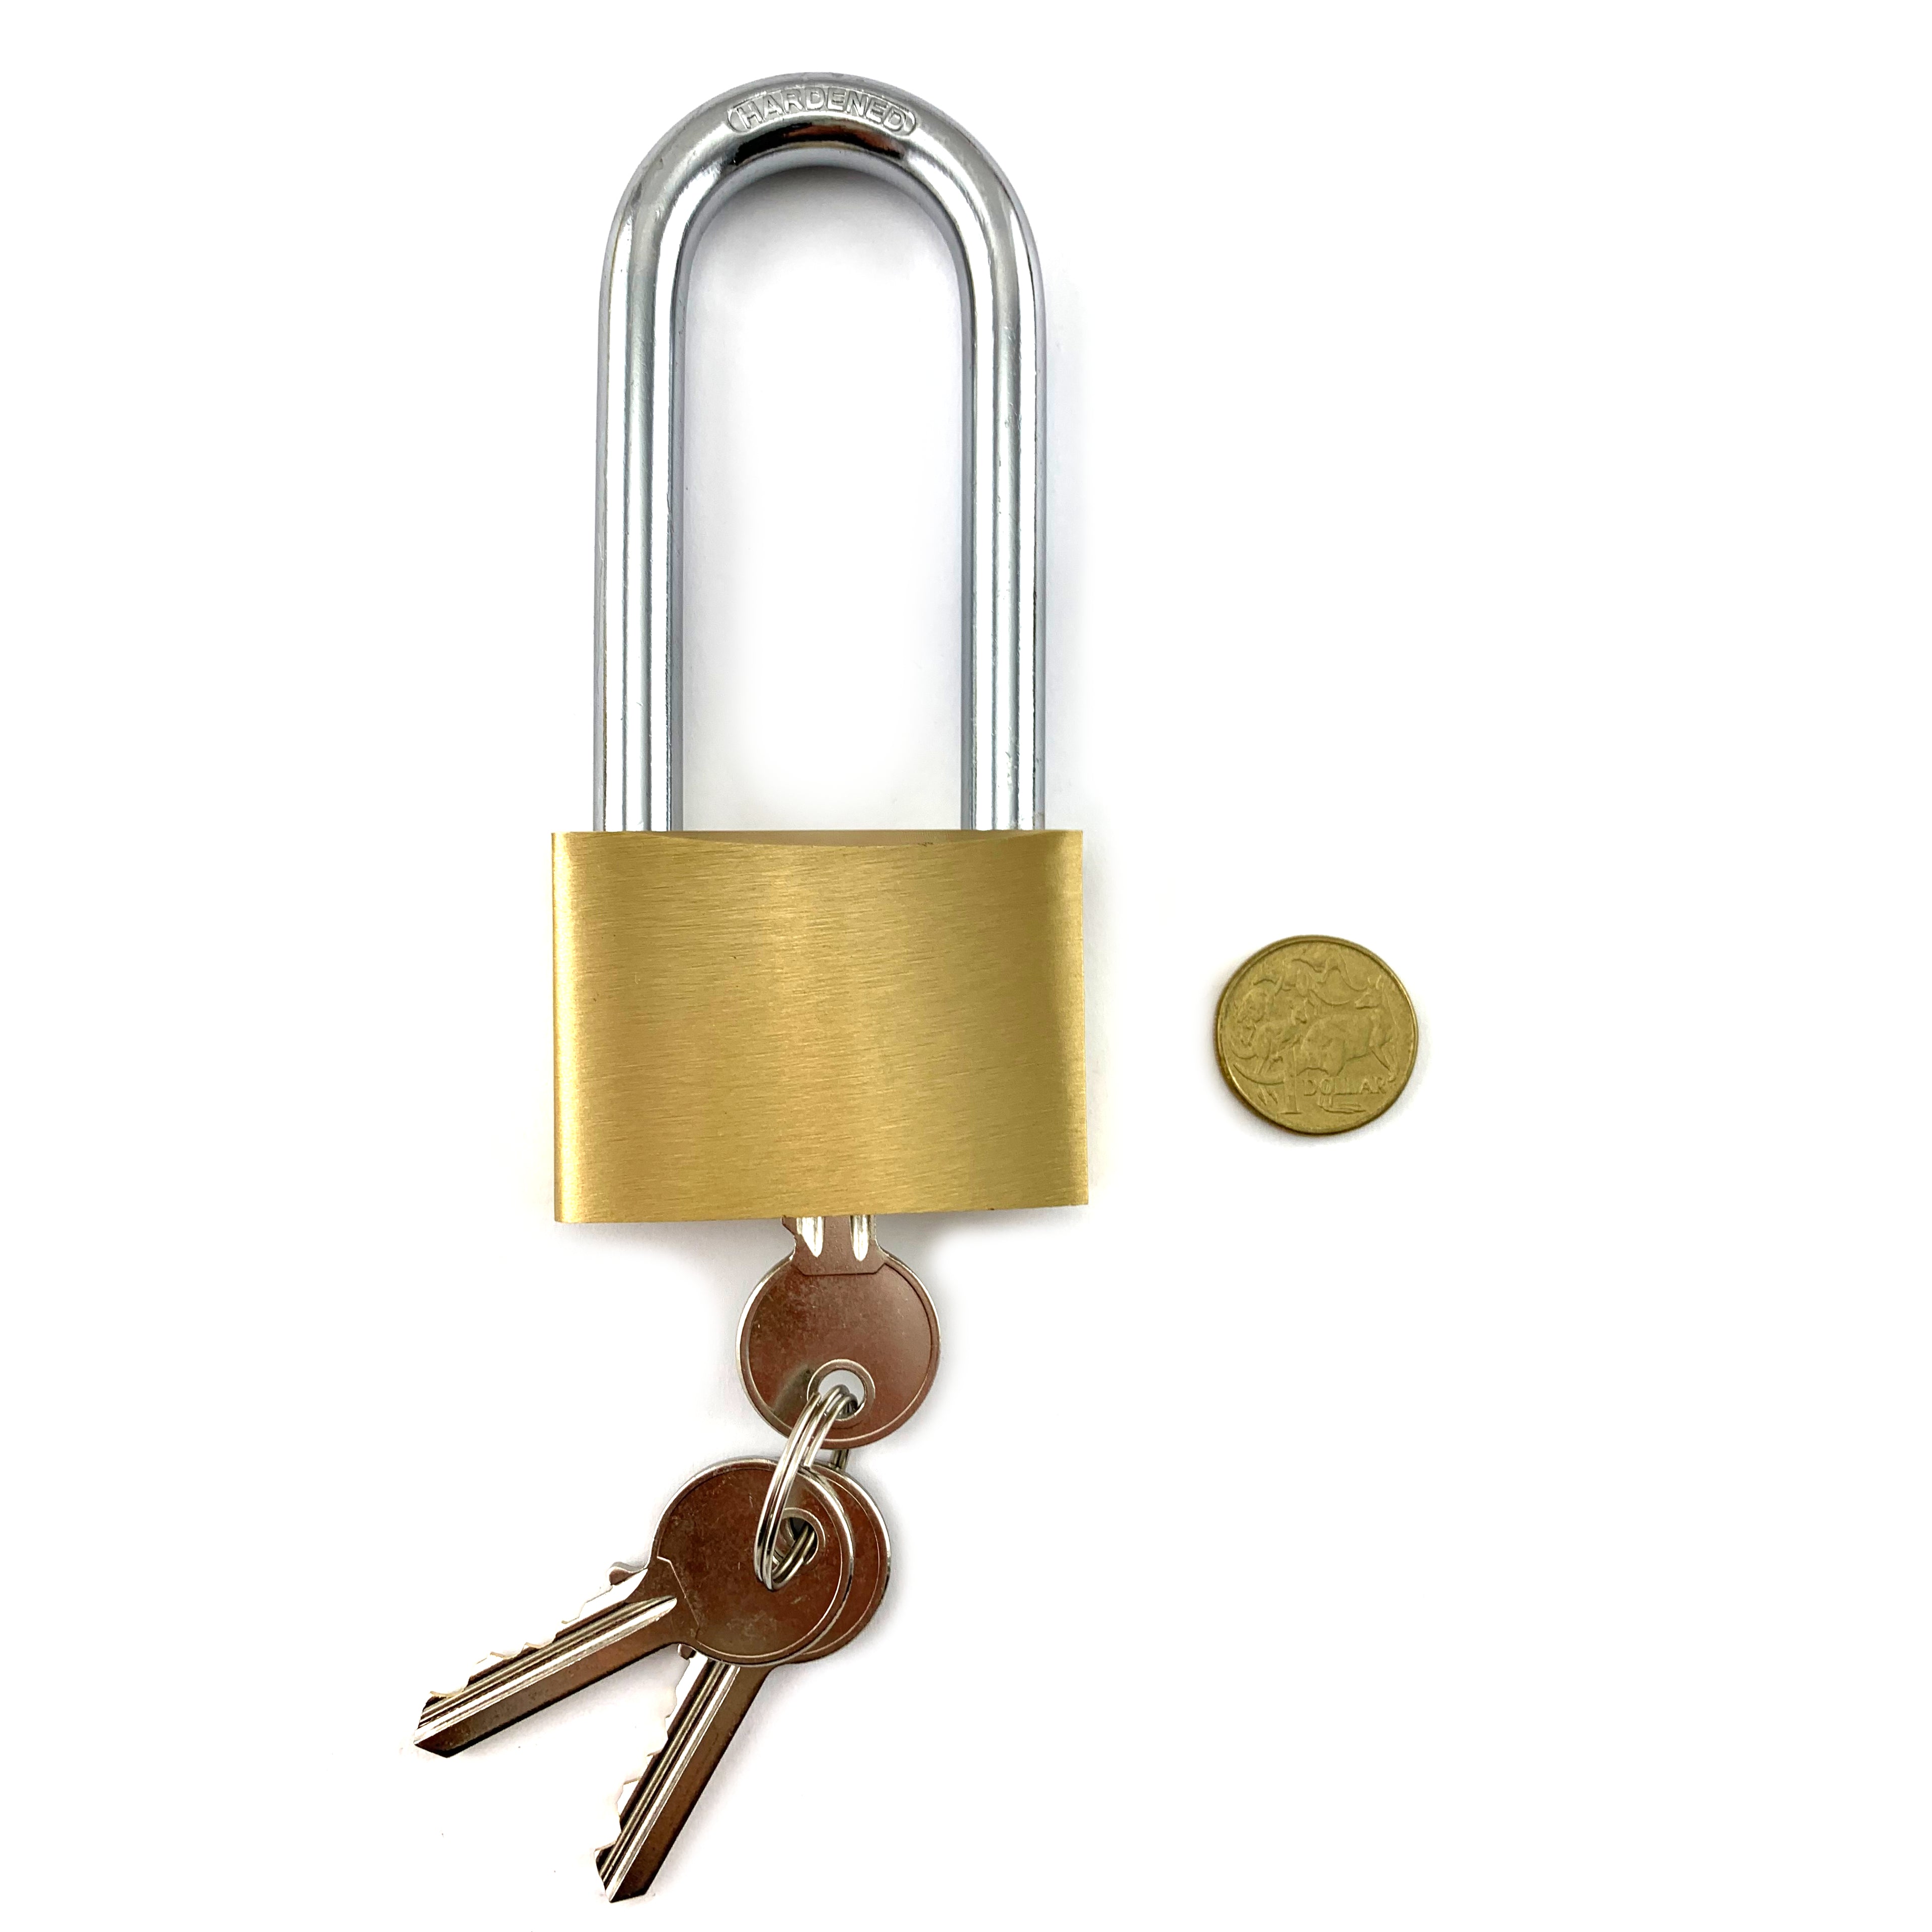 Brass Padlock Large, long shackle, size 12mm, hardened steel and brass. Australia wide delivery.